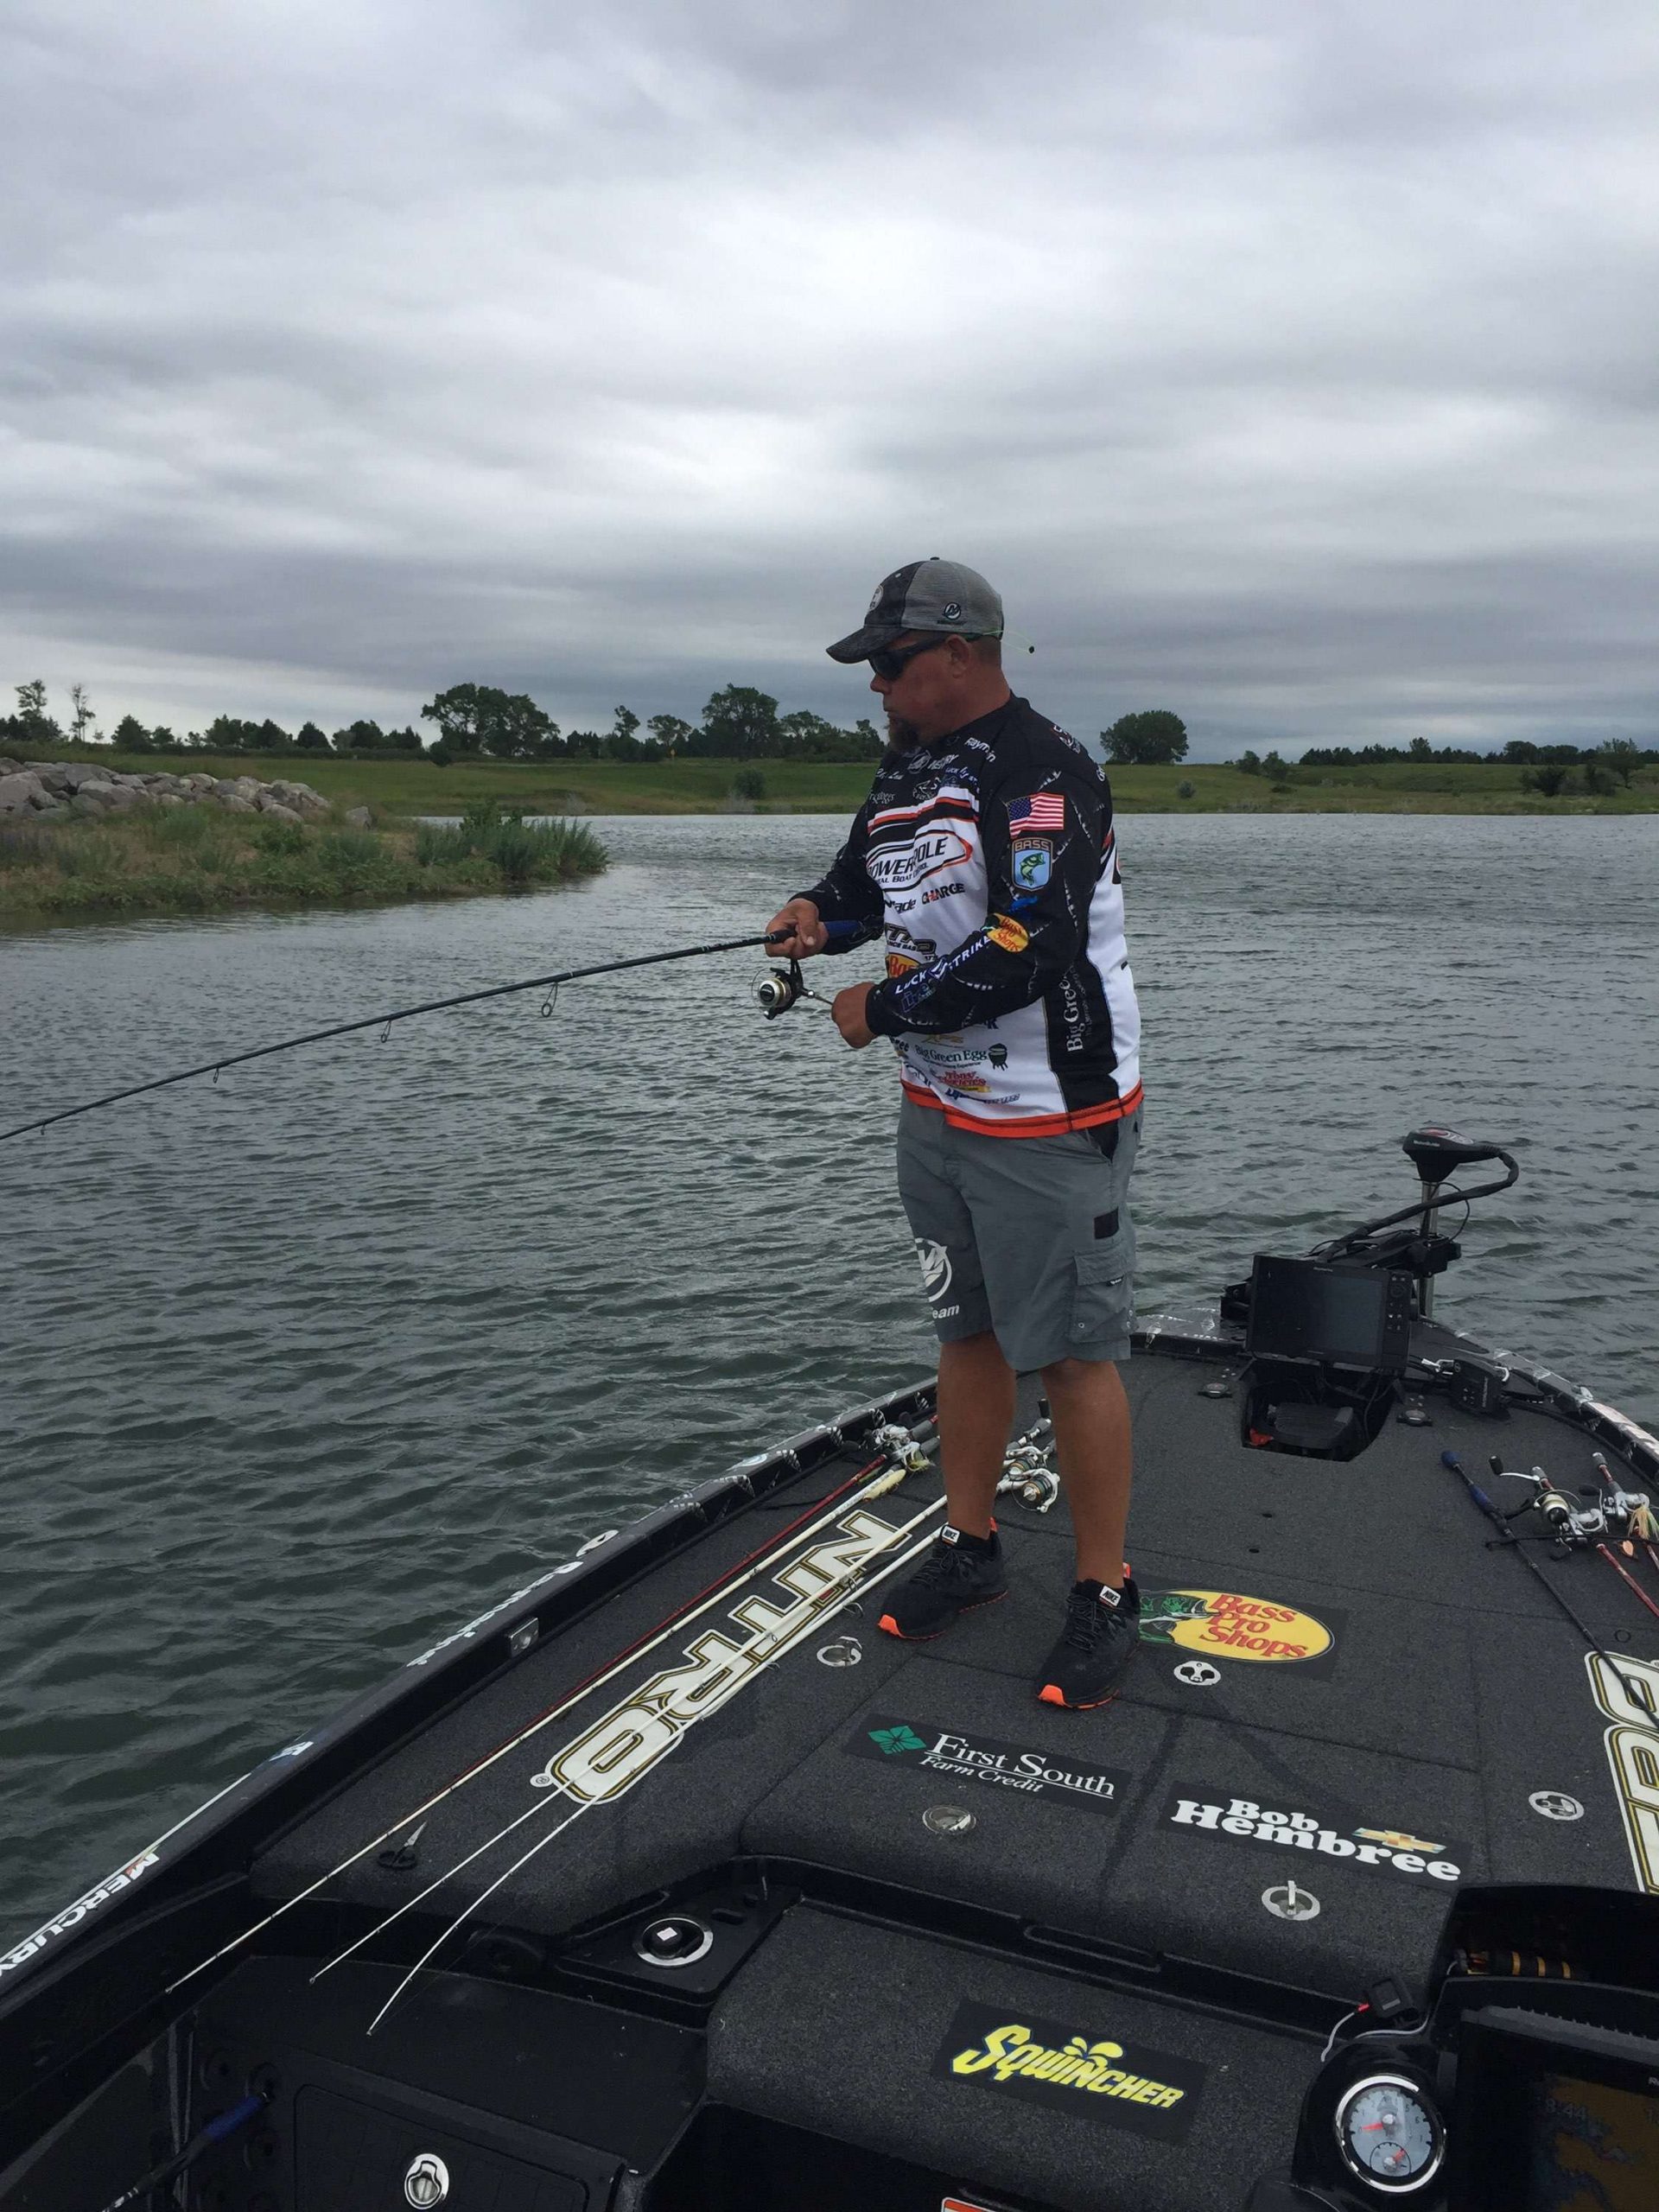 After a rough morning that included losing a bow mount over the bow and a graph that stopped working, Chris Lane has got to five fish. Now he'll go to work on trying to find some larger fish.